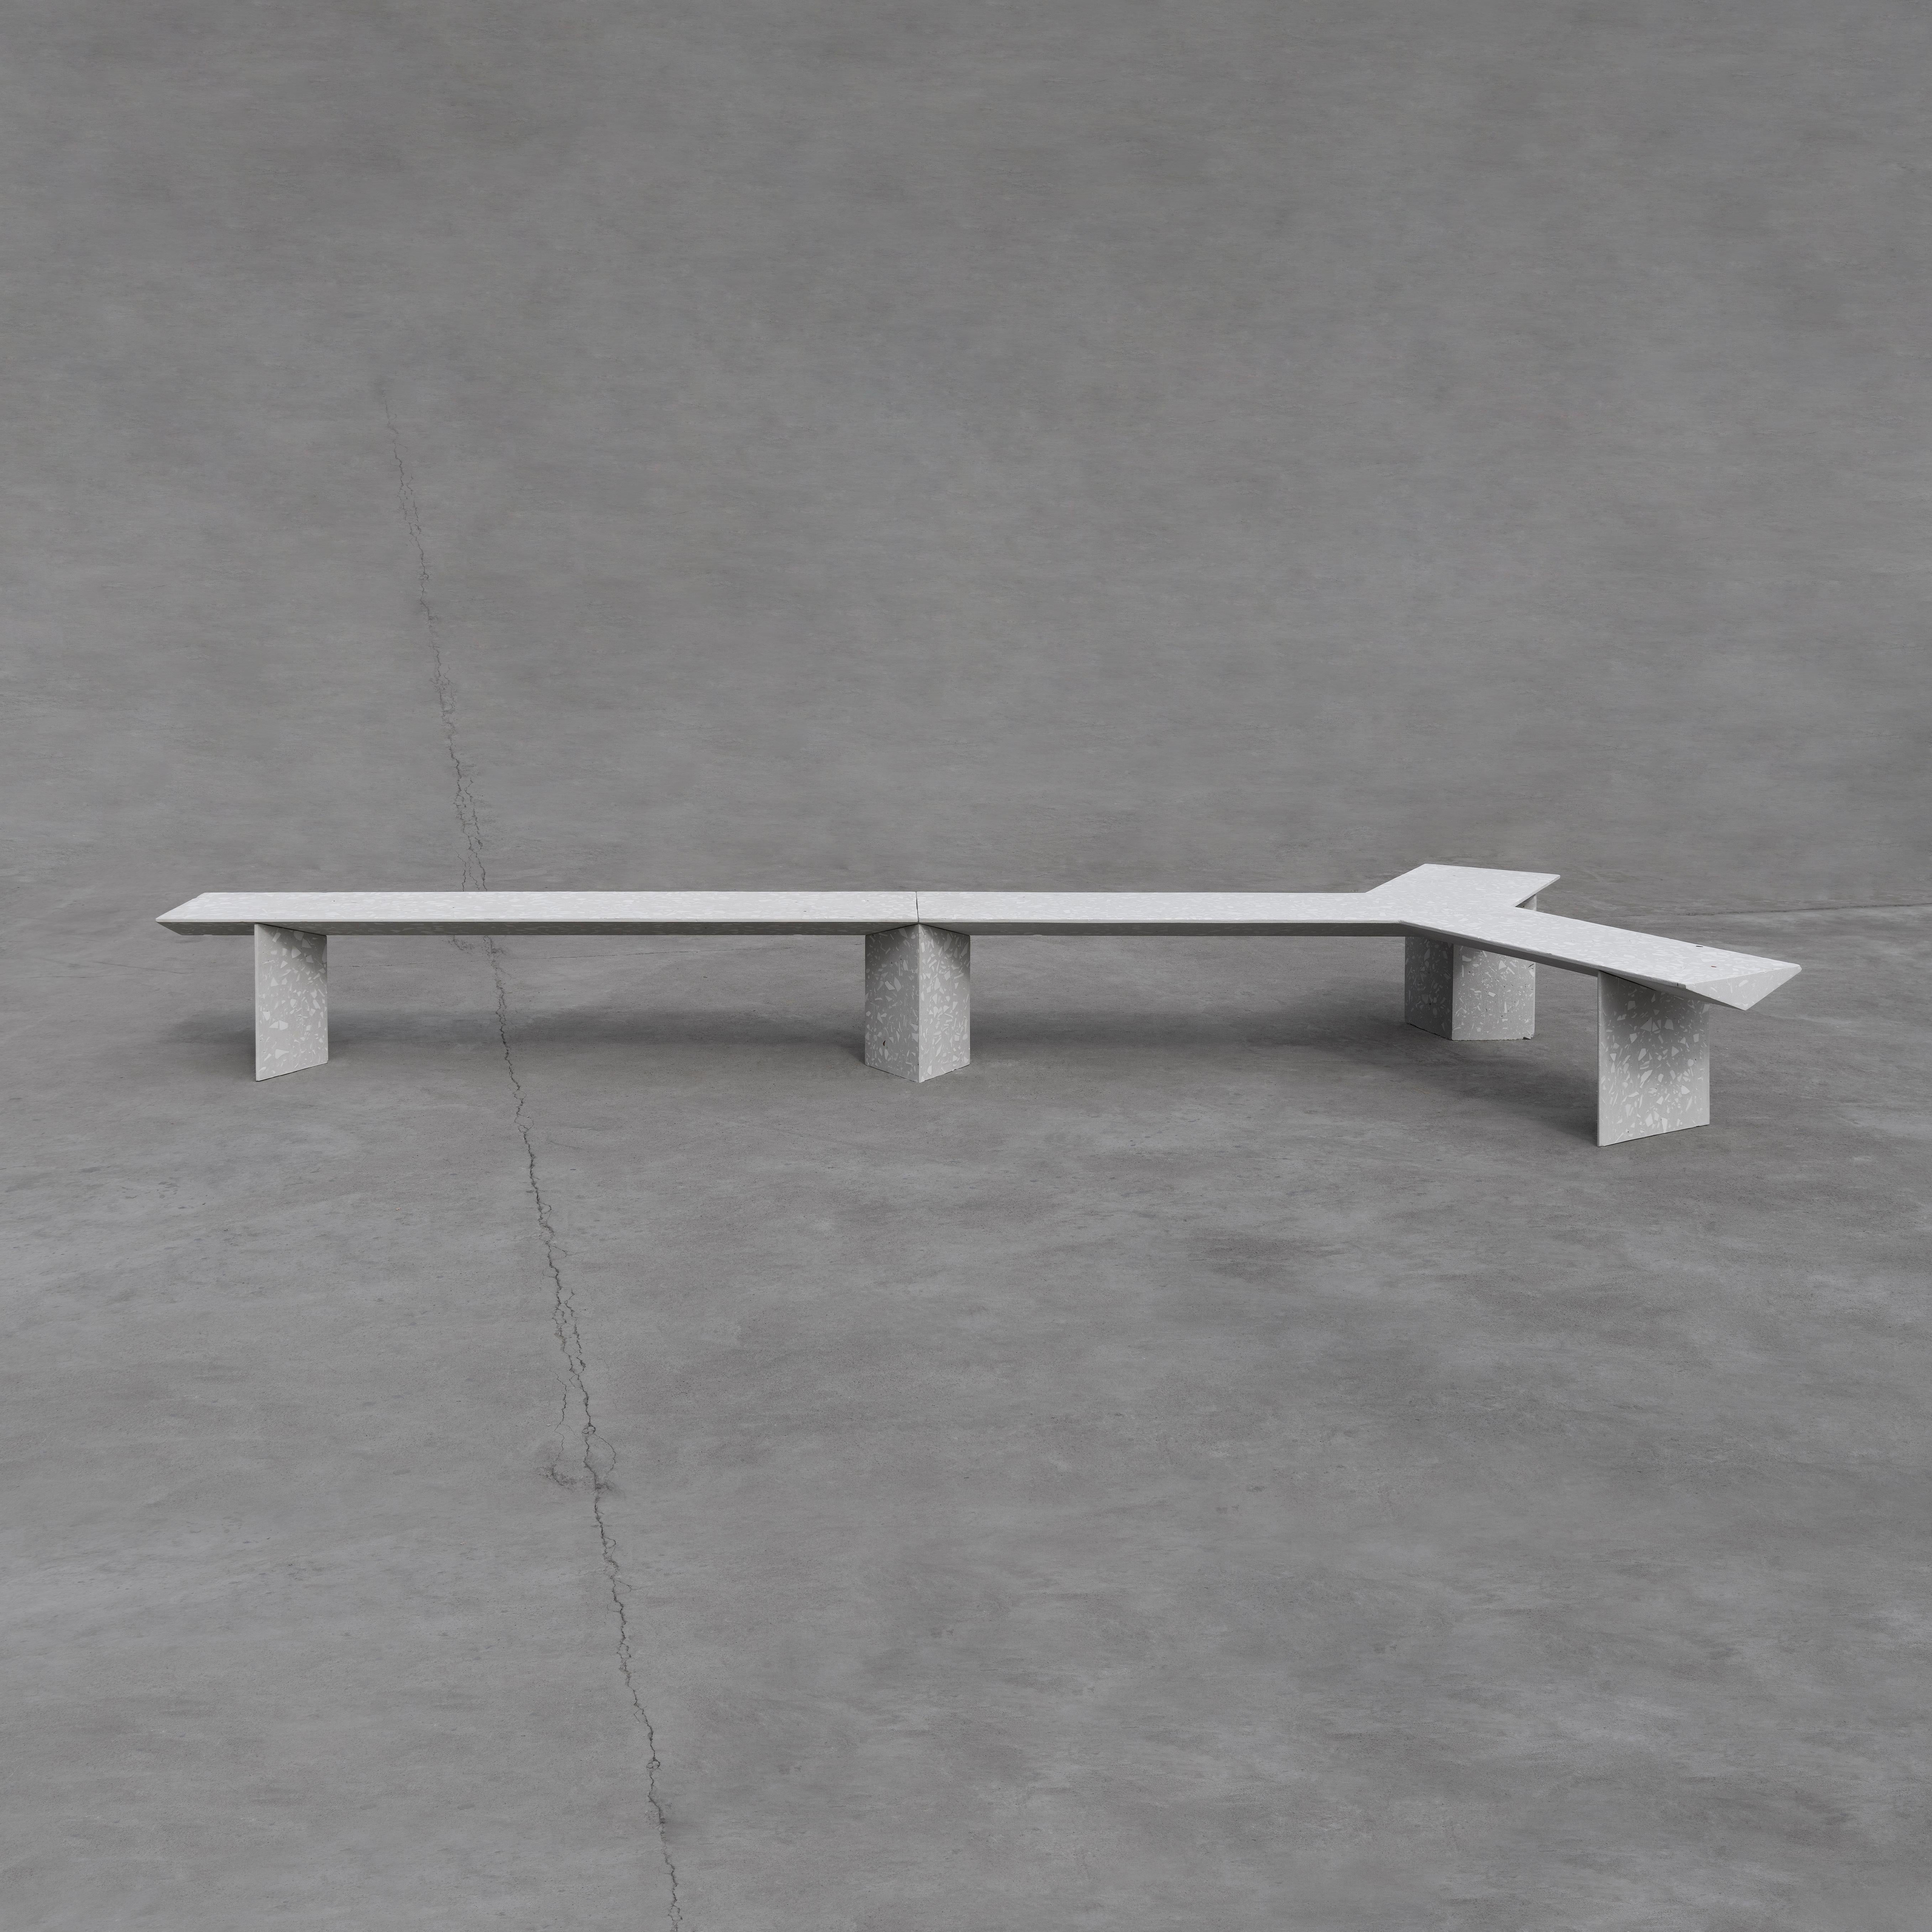 LIANG: Modular benches by Bentu Design

Concrete and ceramic waste / Terrazzo
Measures: 2045 × 1700 × 445 mm + 2000 x 400 x 445 mm
350 kg
Outdoor use: OK

Assemble several modules (LIANG 1 and LIANG 2) to create a sculptural